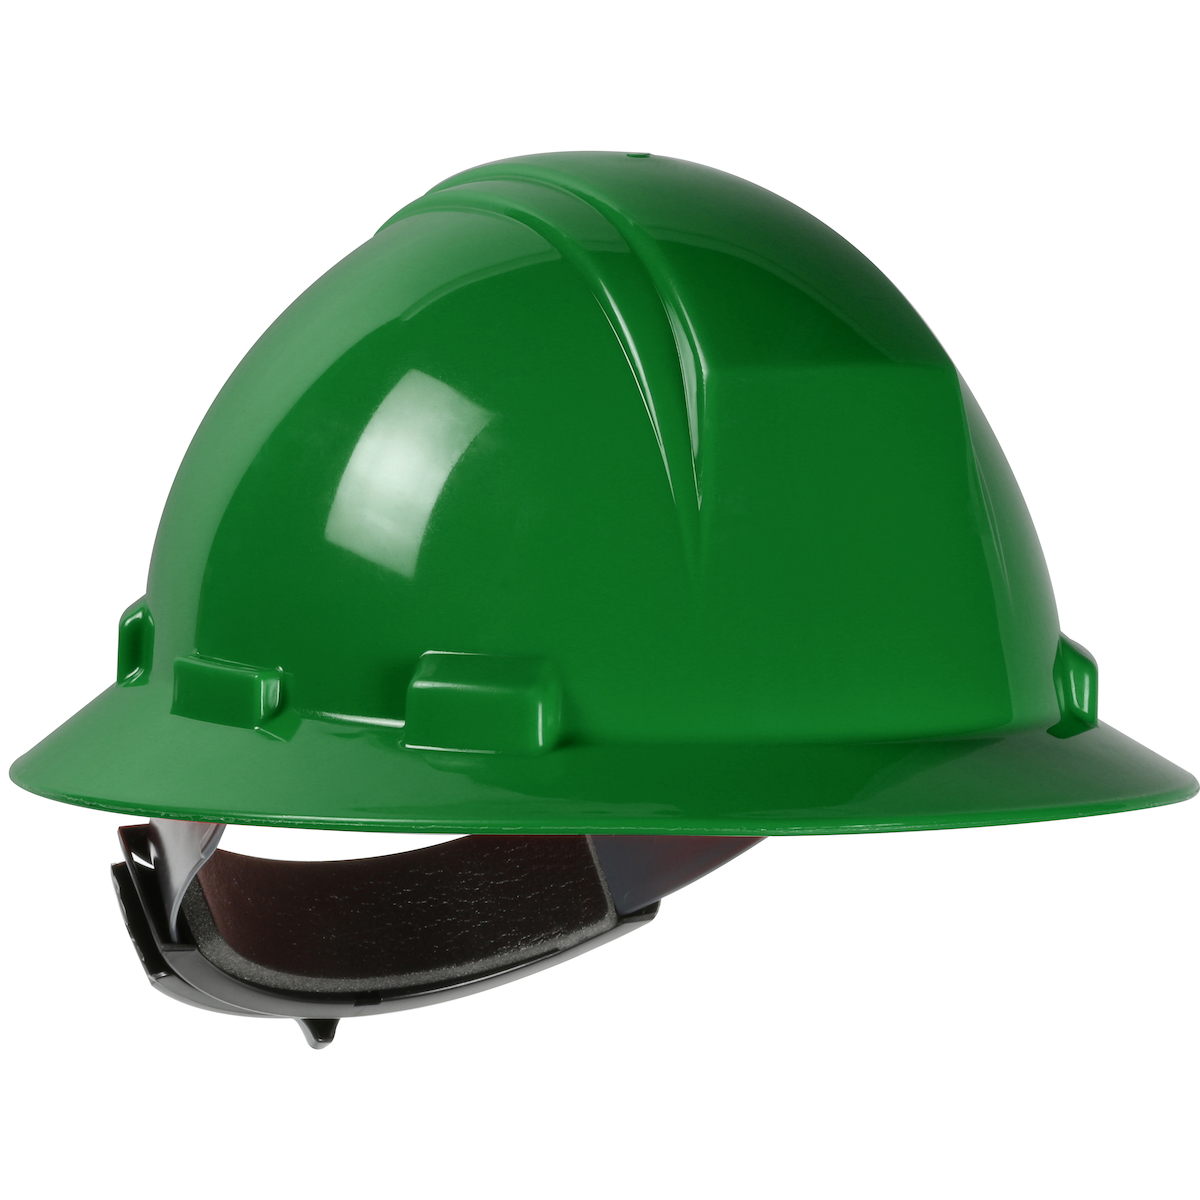 TYPE II FULL BRIM HARD HAT WITH HDPE SHELL, 4-POINT TEXTILE SUSPENSION AND WHEEL RATCHET ADJUSTMENT